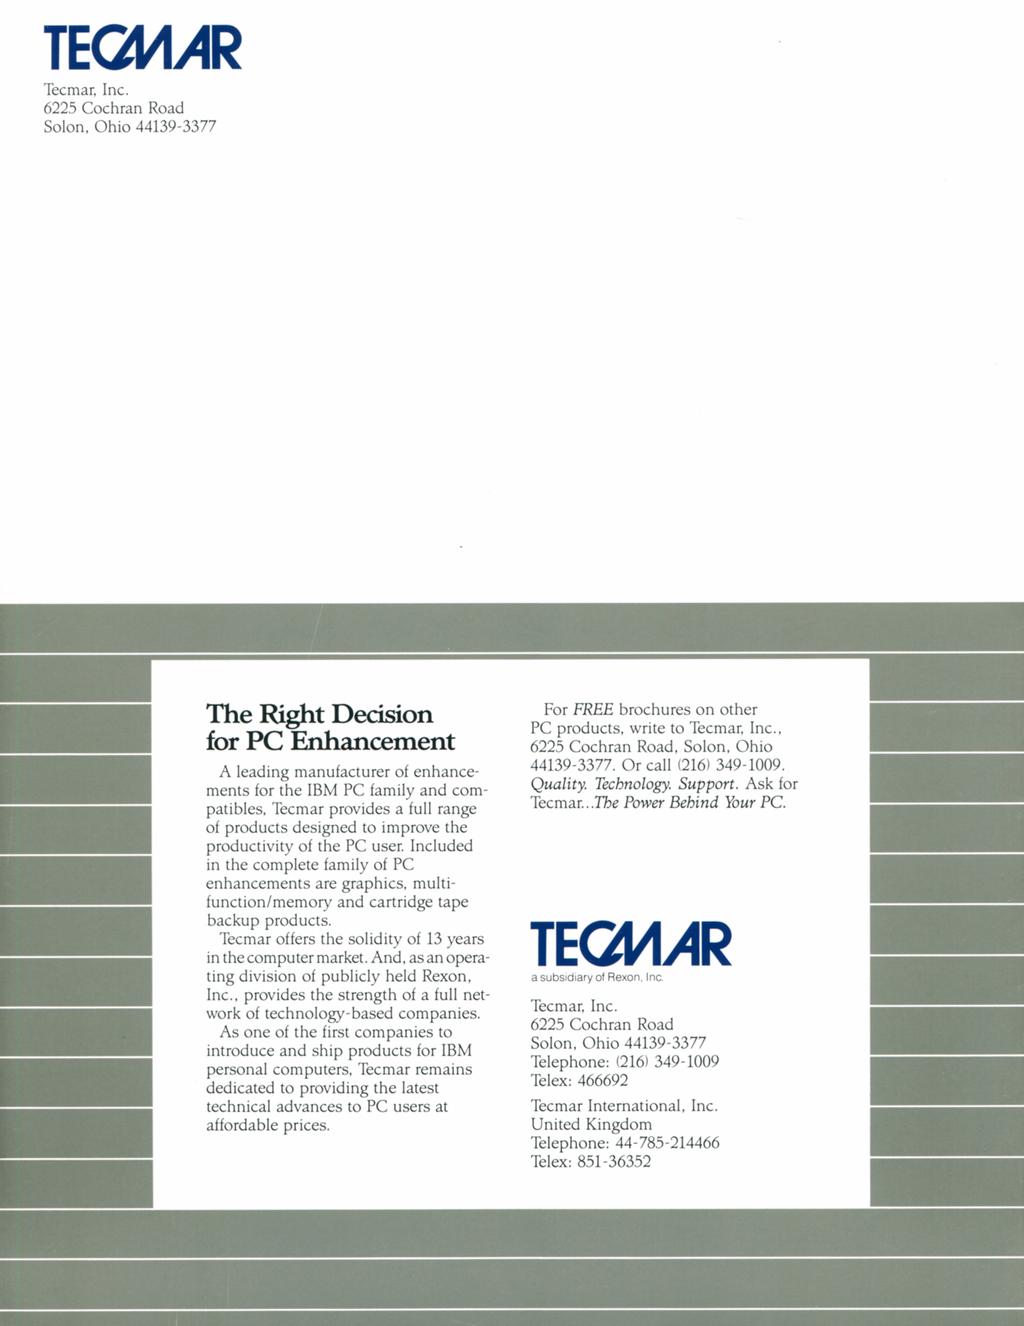 TECMAR Iccmar. Inc. 6225 Cochran Road Solon, Ohio 44139-3377 The Right Decision for PC Enhancement.\ leading manufacturer ot enhancements for the IBM PC family and.